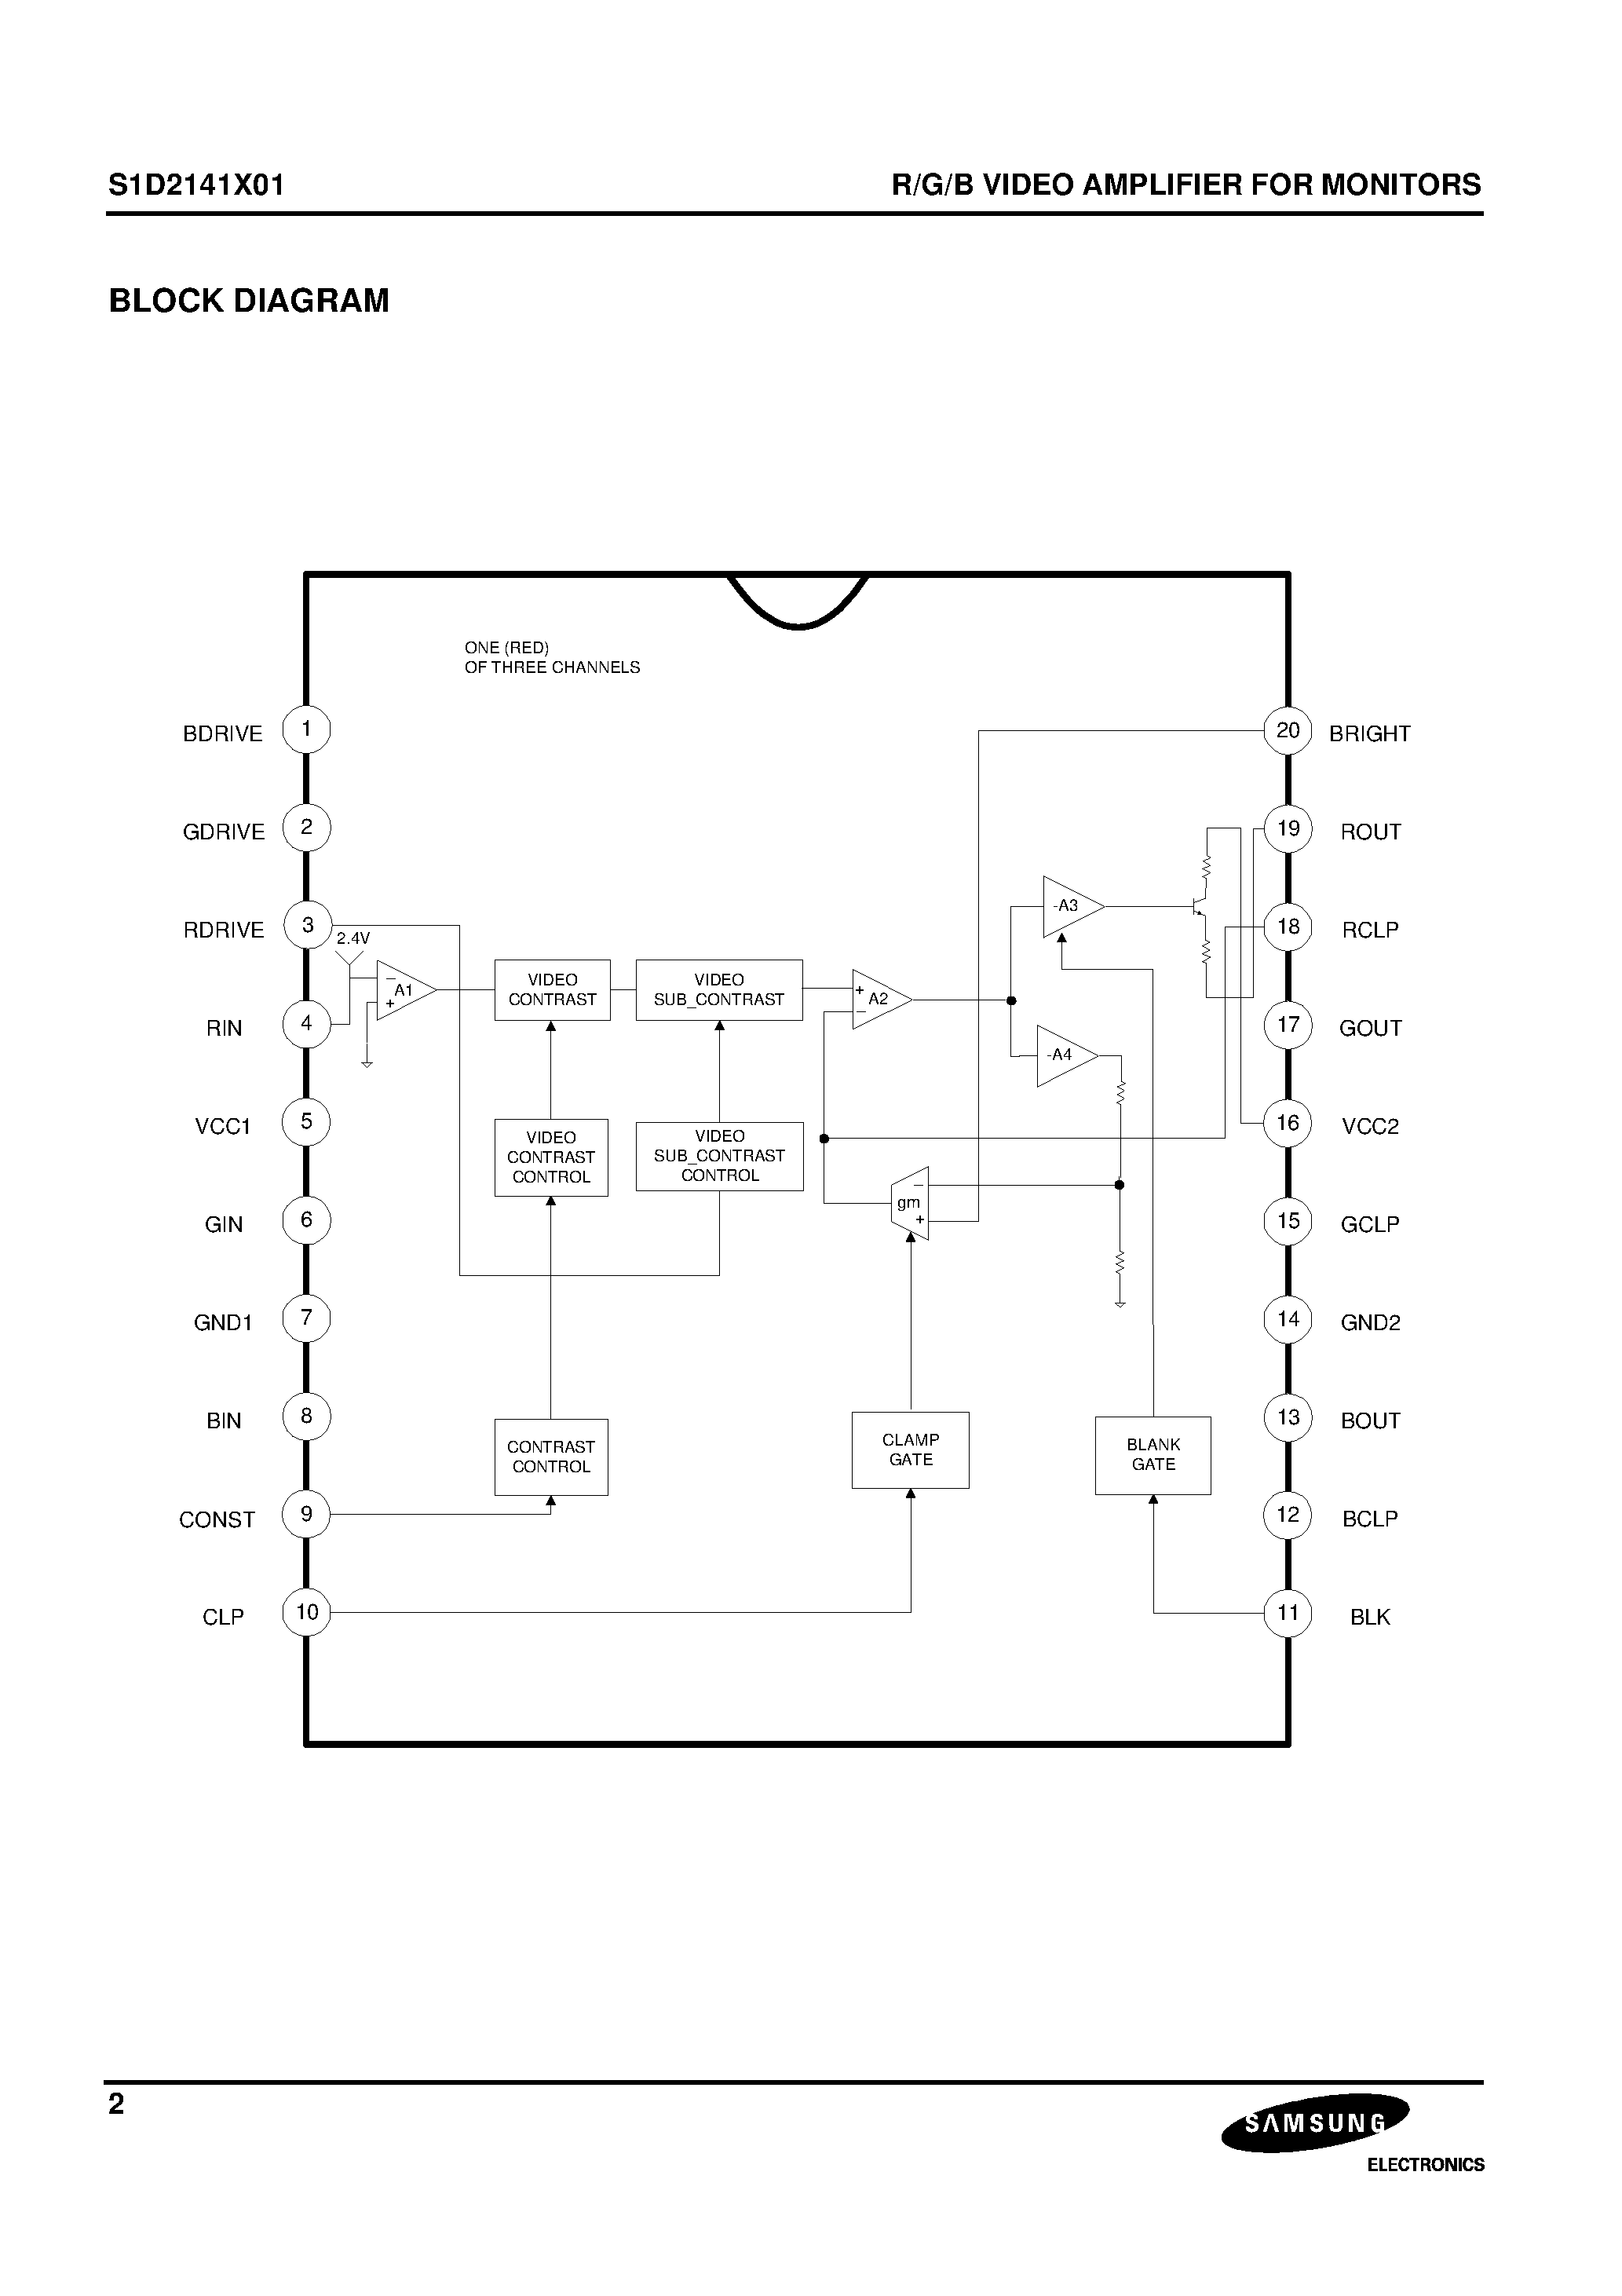 Datasheet S1D2141X01-D0B0 - R/G/B VIDEO AMPLIFIER FOR MONITORS page 2